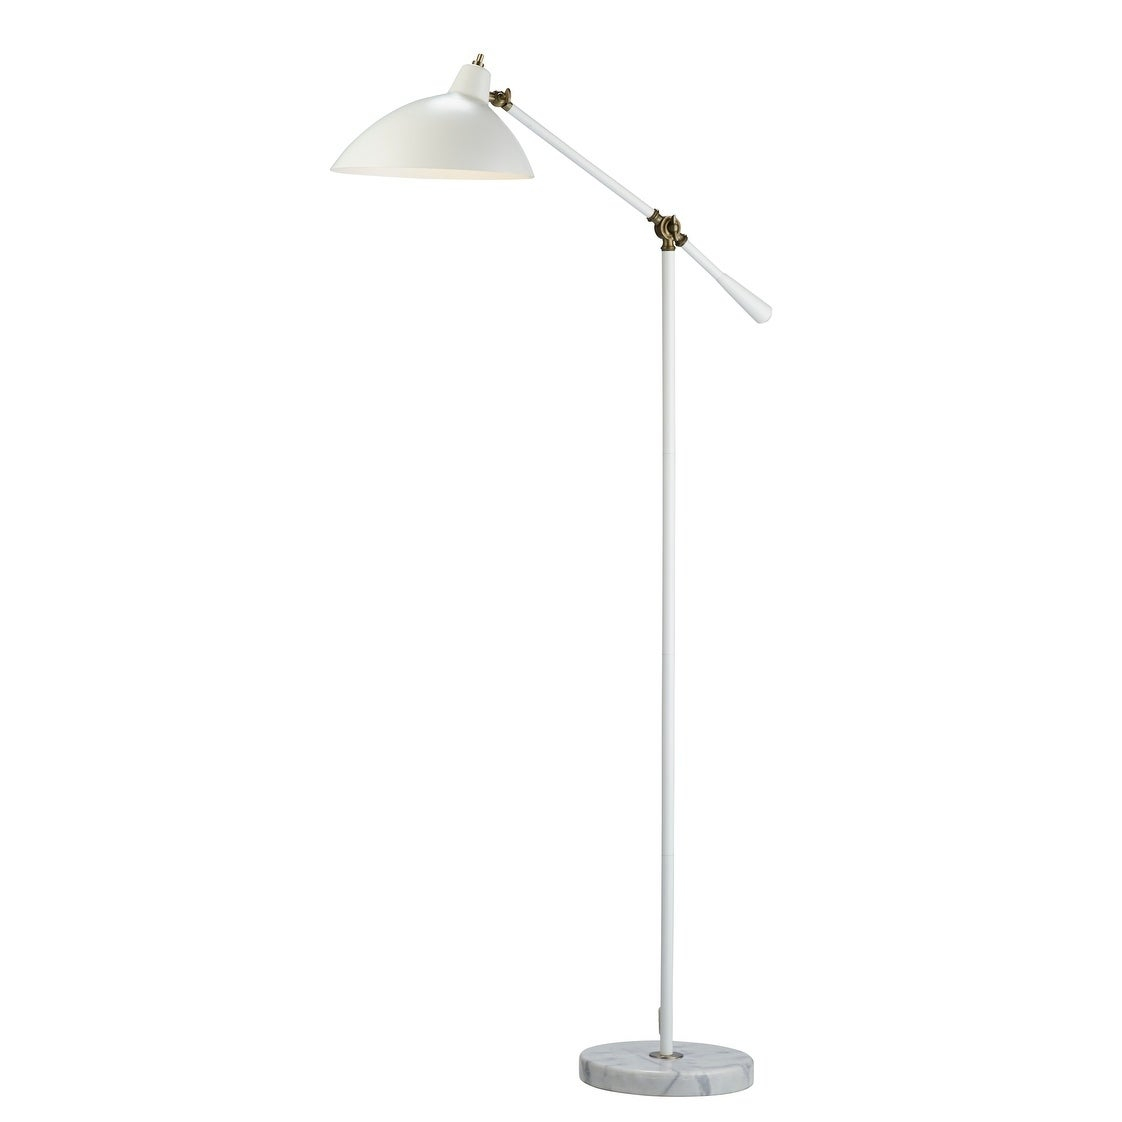 Strick Bolton Kellen Adjustable White Floor Lamp With Marble Base pertaining to dimensions 1122 X 1122